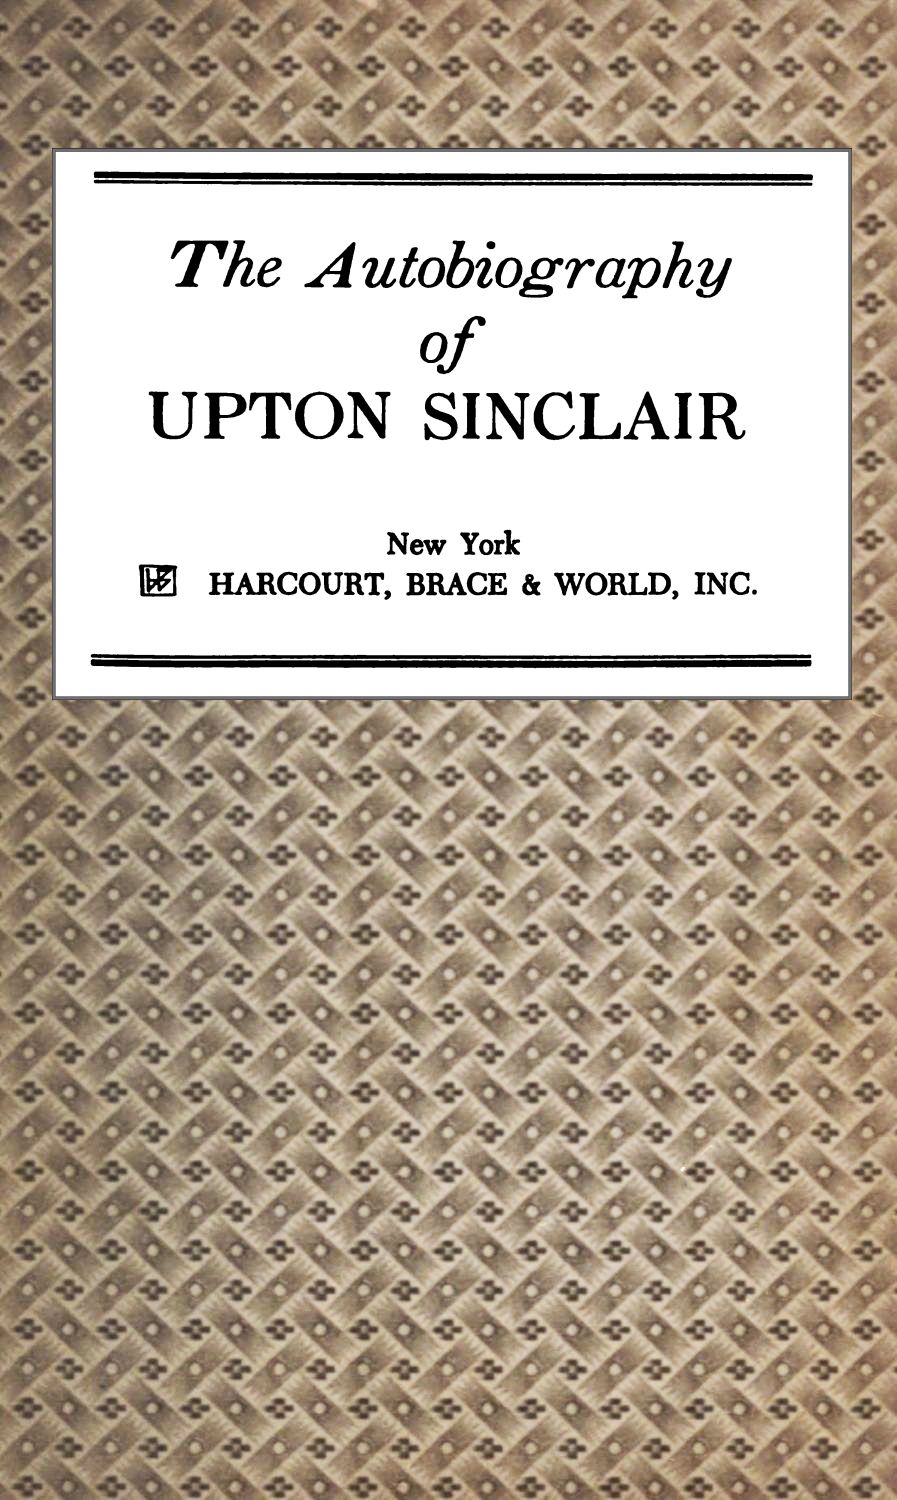 The Project Gutenberg eBook of The Autobiography of Upton Sinclair.